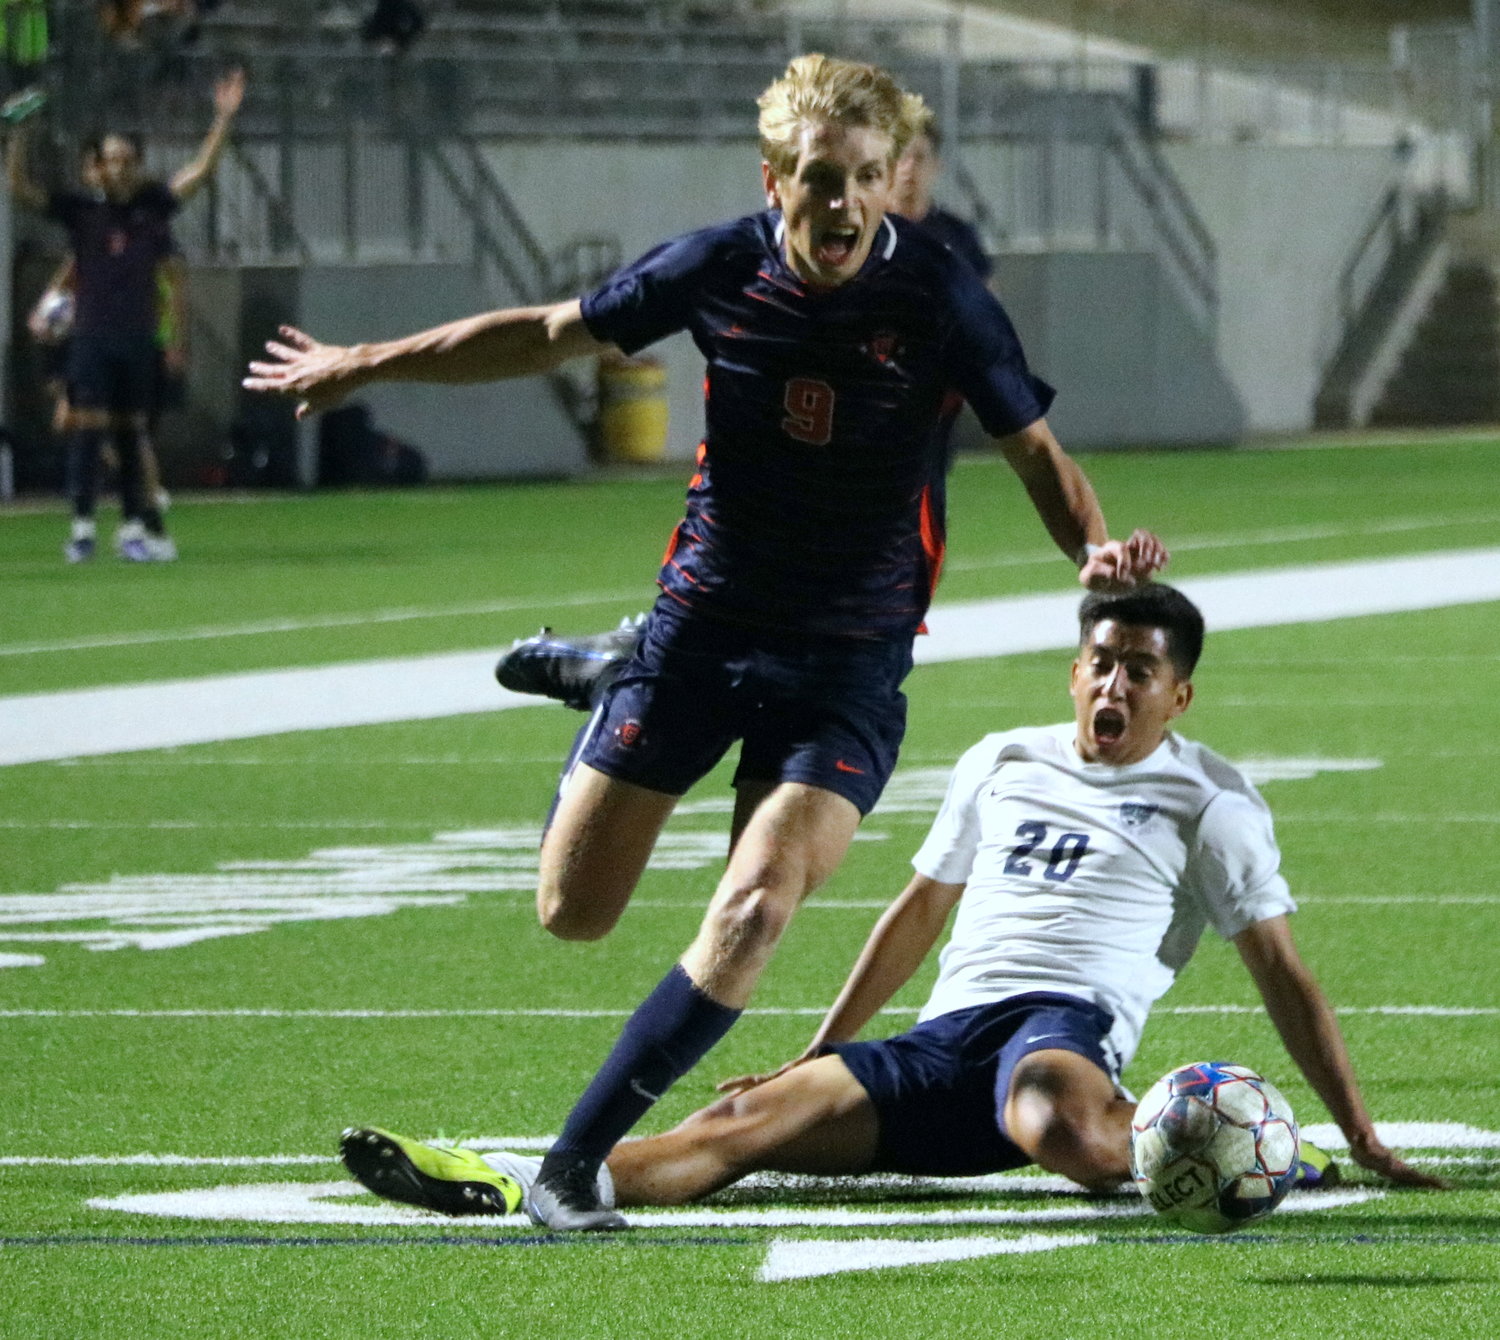 Hunter Merritt dribbles the ball past a defender during Tuesday’s Class 6A area round game between Seven Lakes and Cy-Ridge at Legacy Stadium.